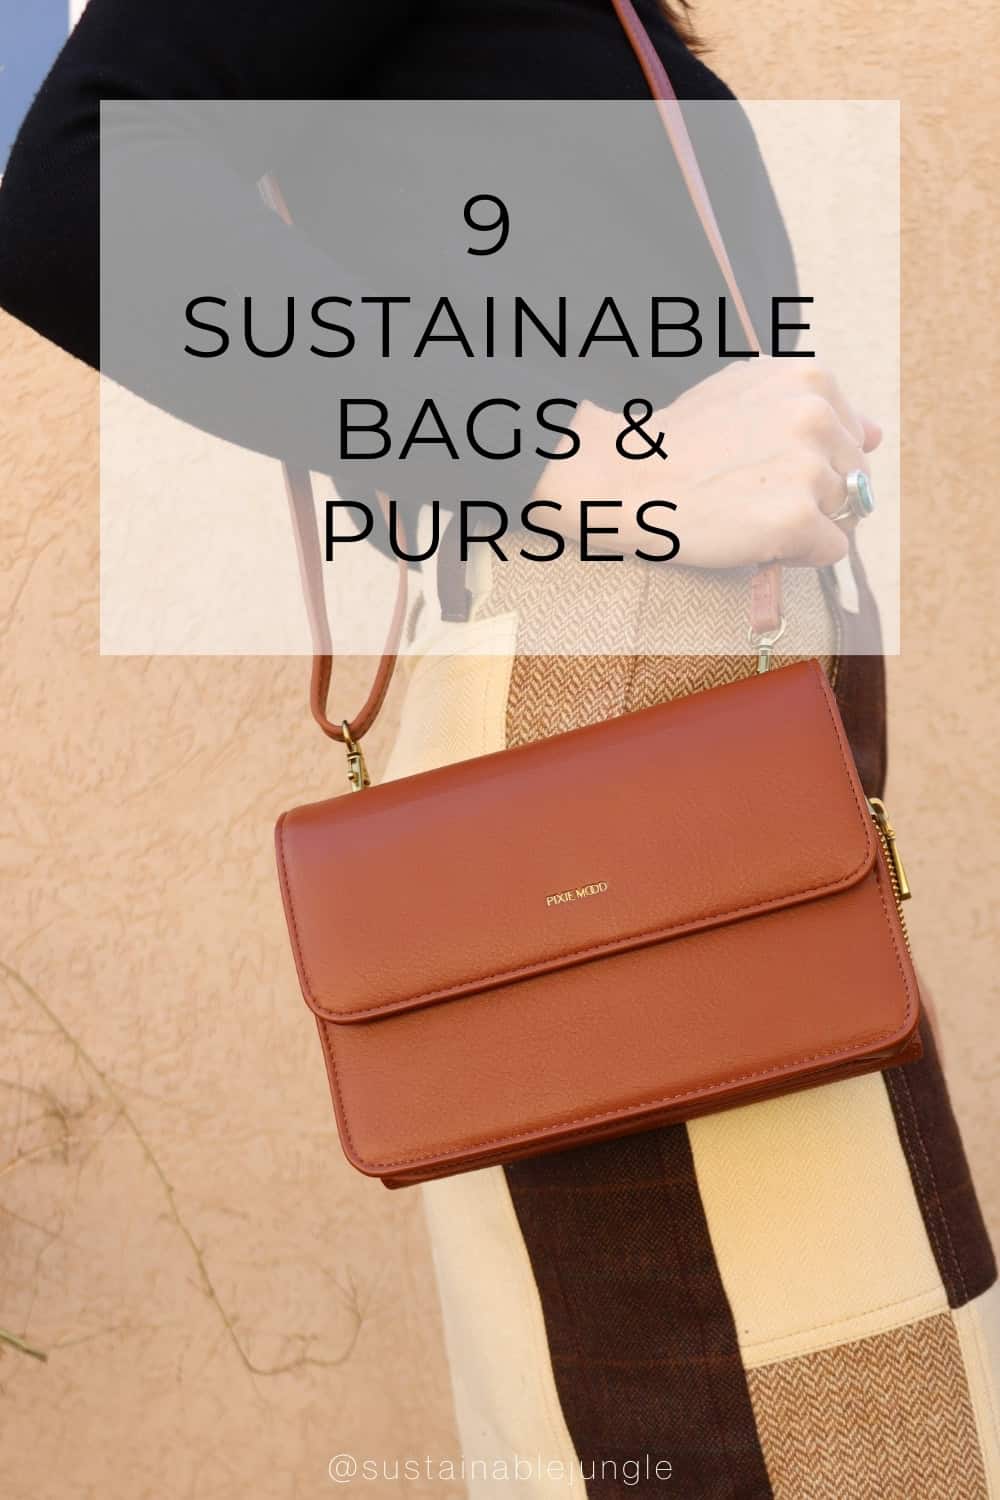 9 Sustainable Bags & Purses To Keep Your Essentials On Hand(bag) Image by Sustainable Jungle #sustainablebags #sustainablepurses #sustainablehandbags #ecofriendlybags #ecofriendlypurses #ecofriendlyhandbags #sustainablejungle